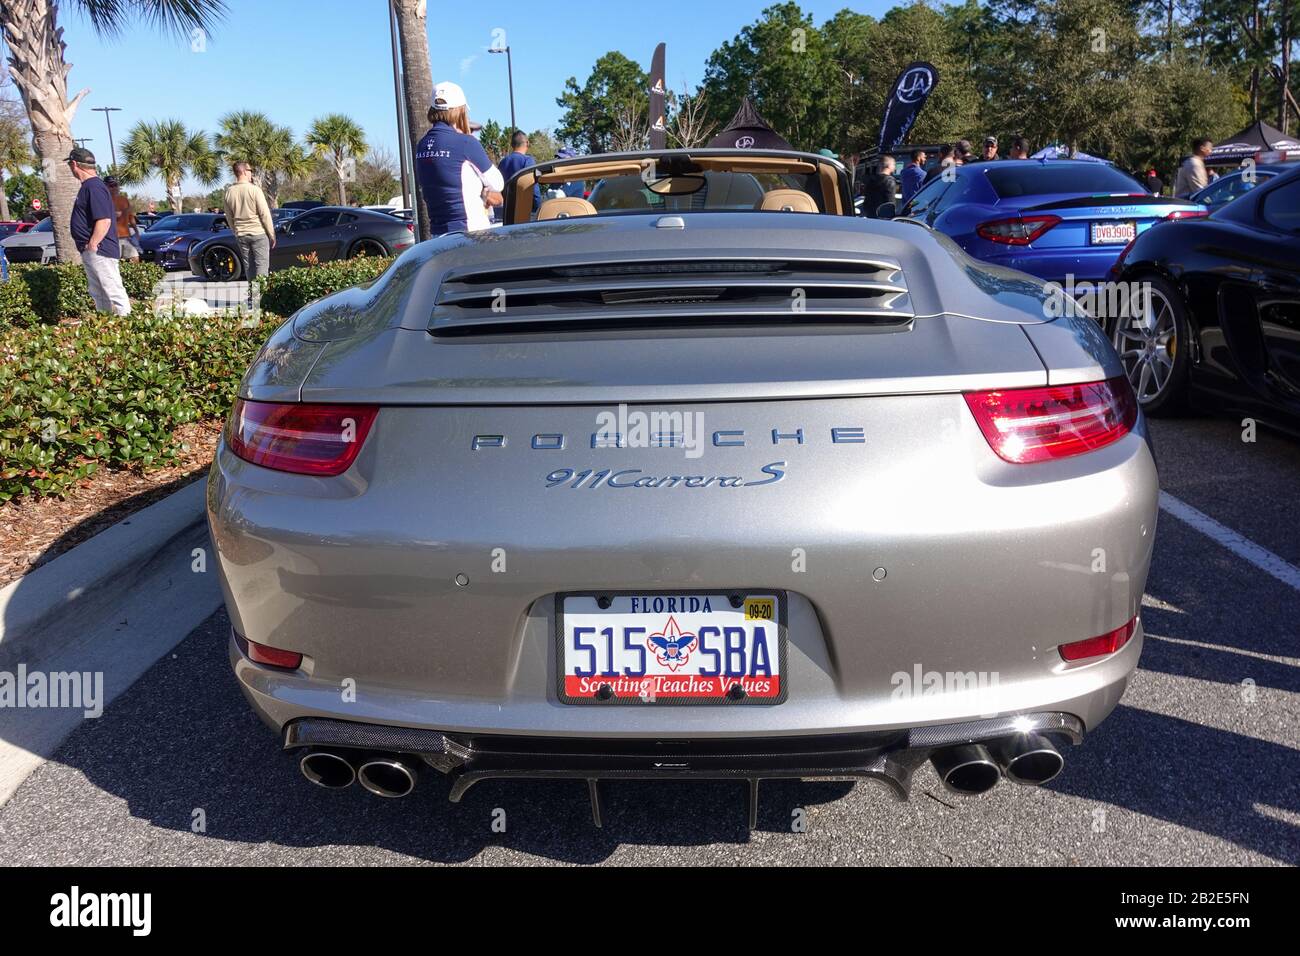 Orlando, FL/USA-3/1/20: The rearend of a silver gray Porsche Carrera S at a free car show in a retail store parking lot. Stock Photo